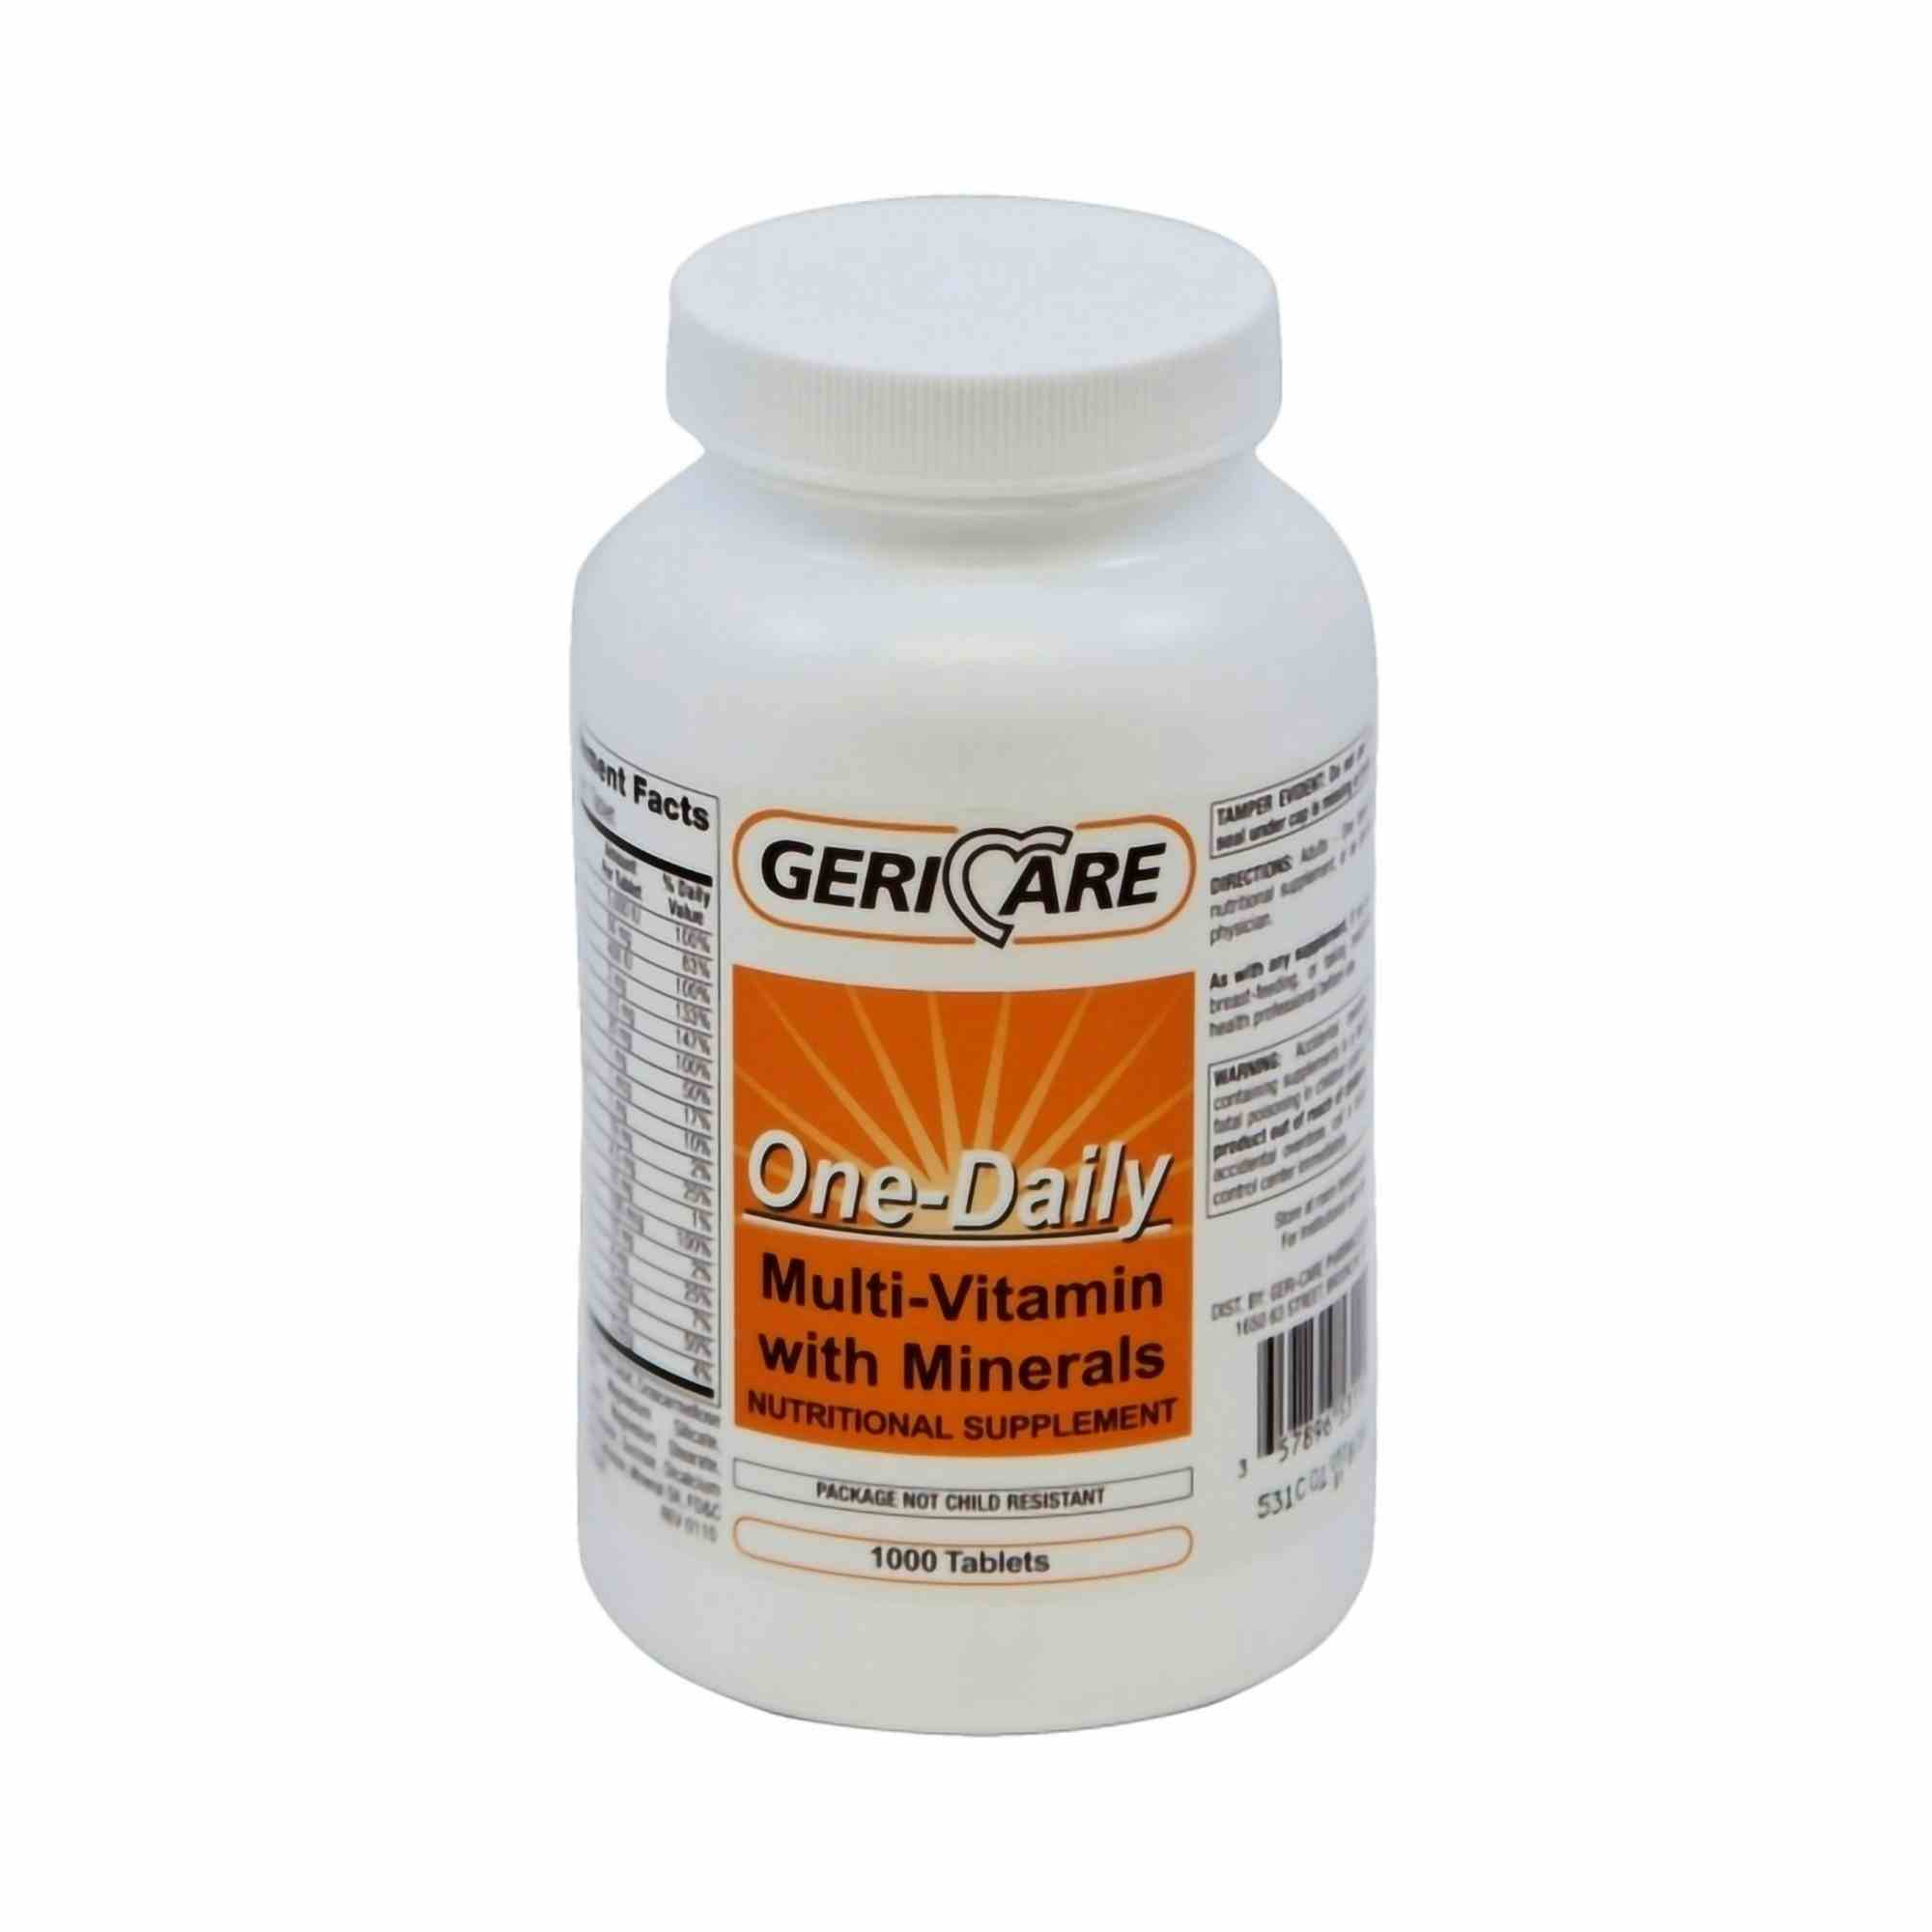 Geri-Care One-Daily Multivitamin with Minerals, 1,000 Tablets